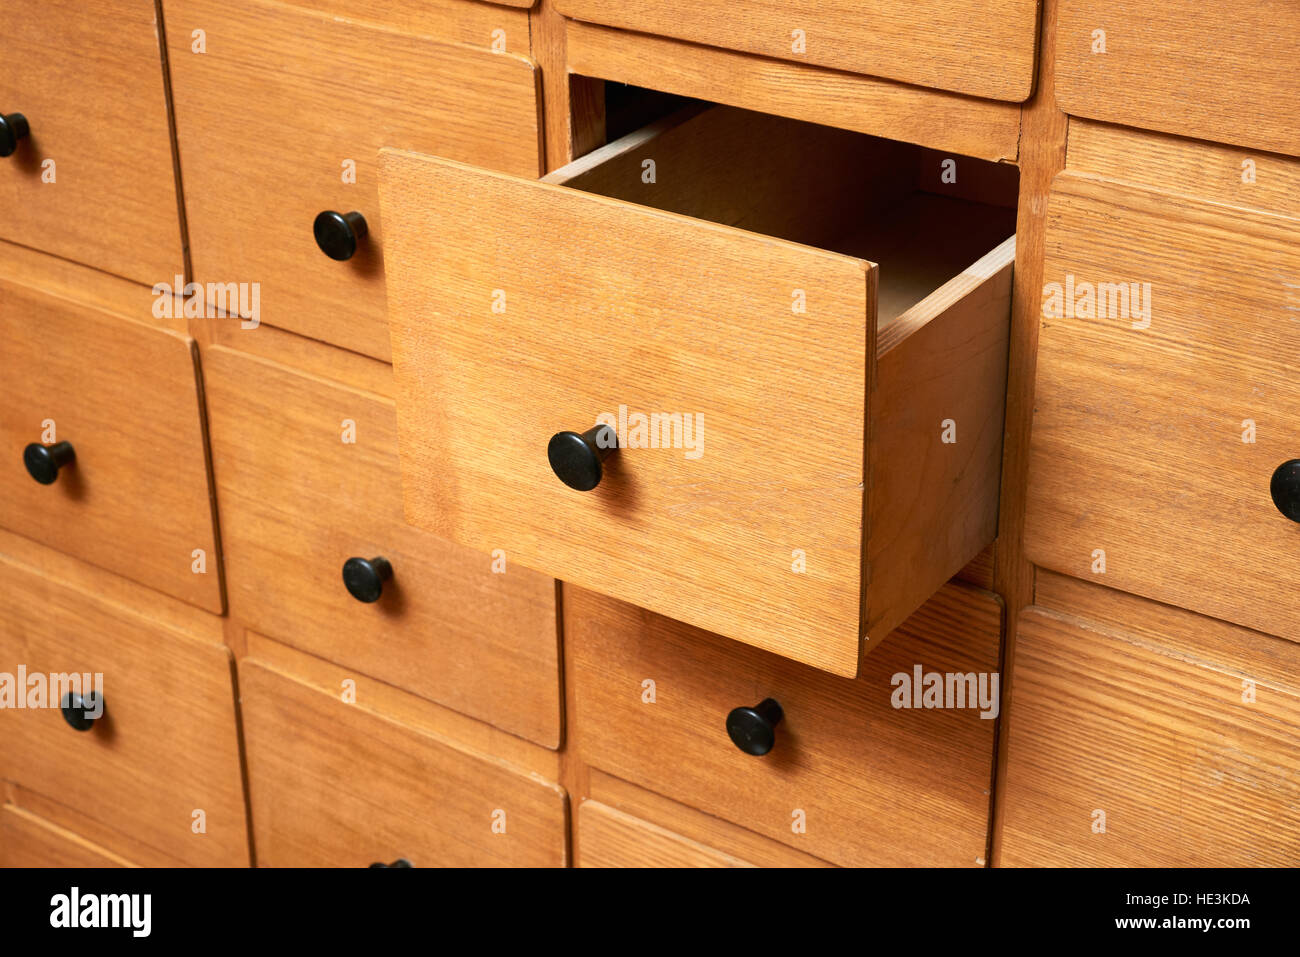 Backgrounds and textures: very old wooden cabinet with drawers Stock Photo